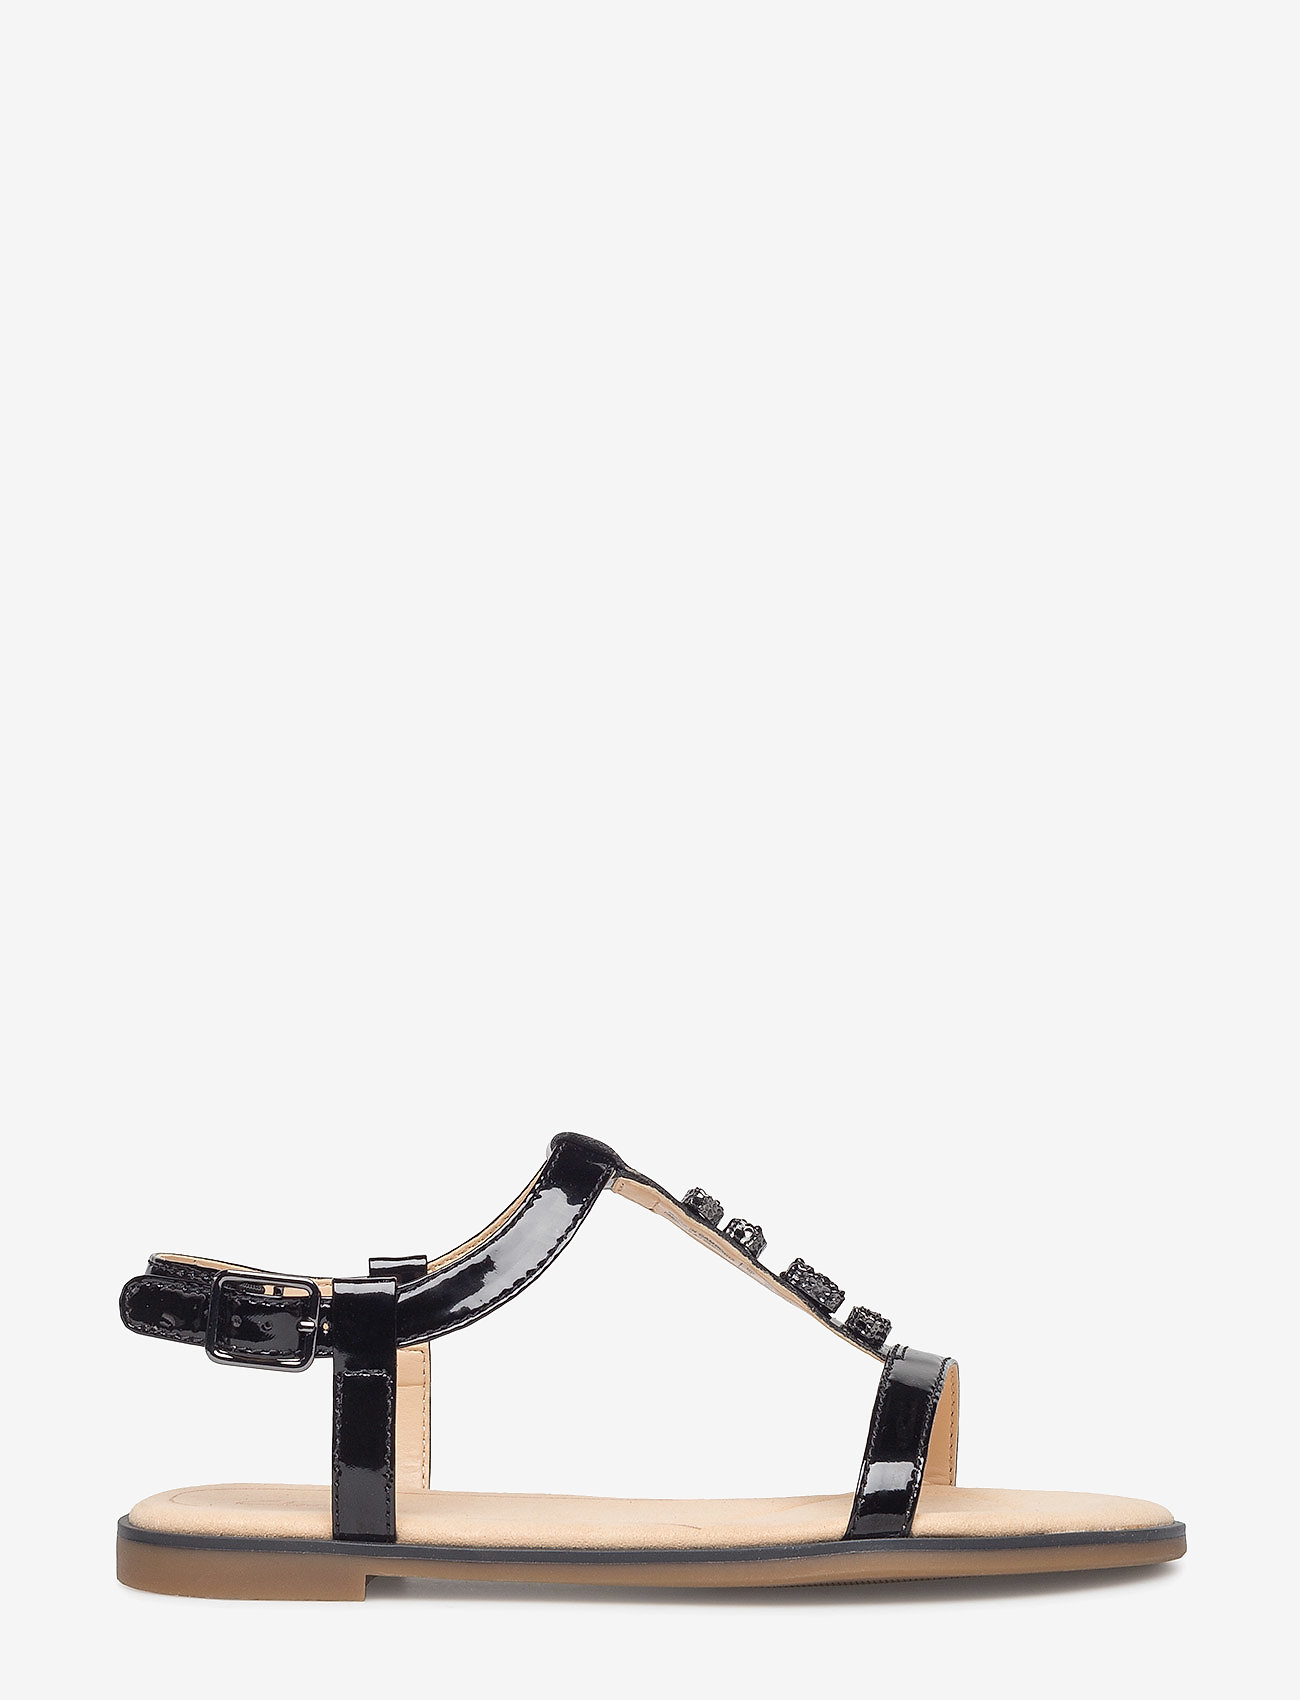 clarks bay blossom sandals